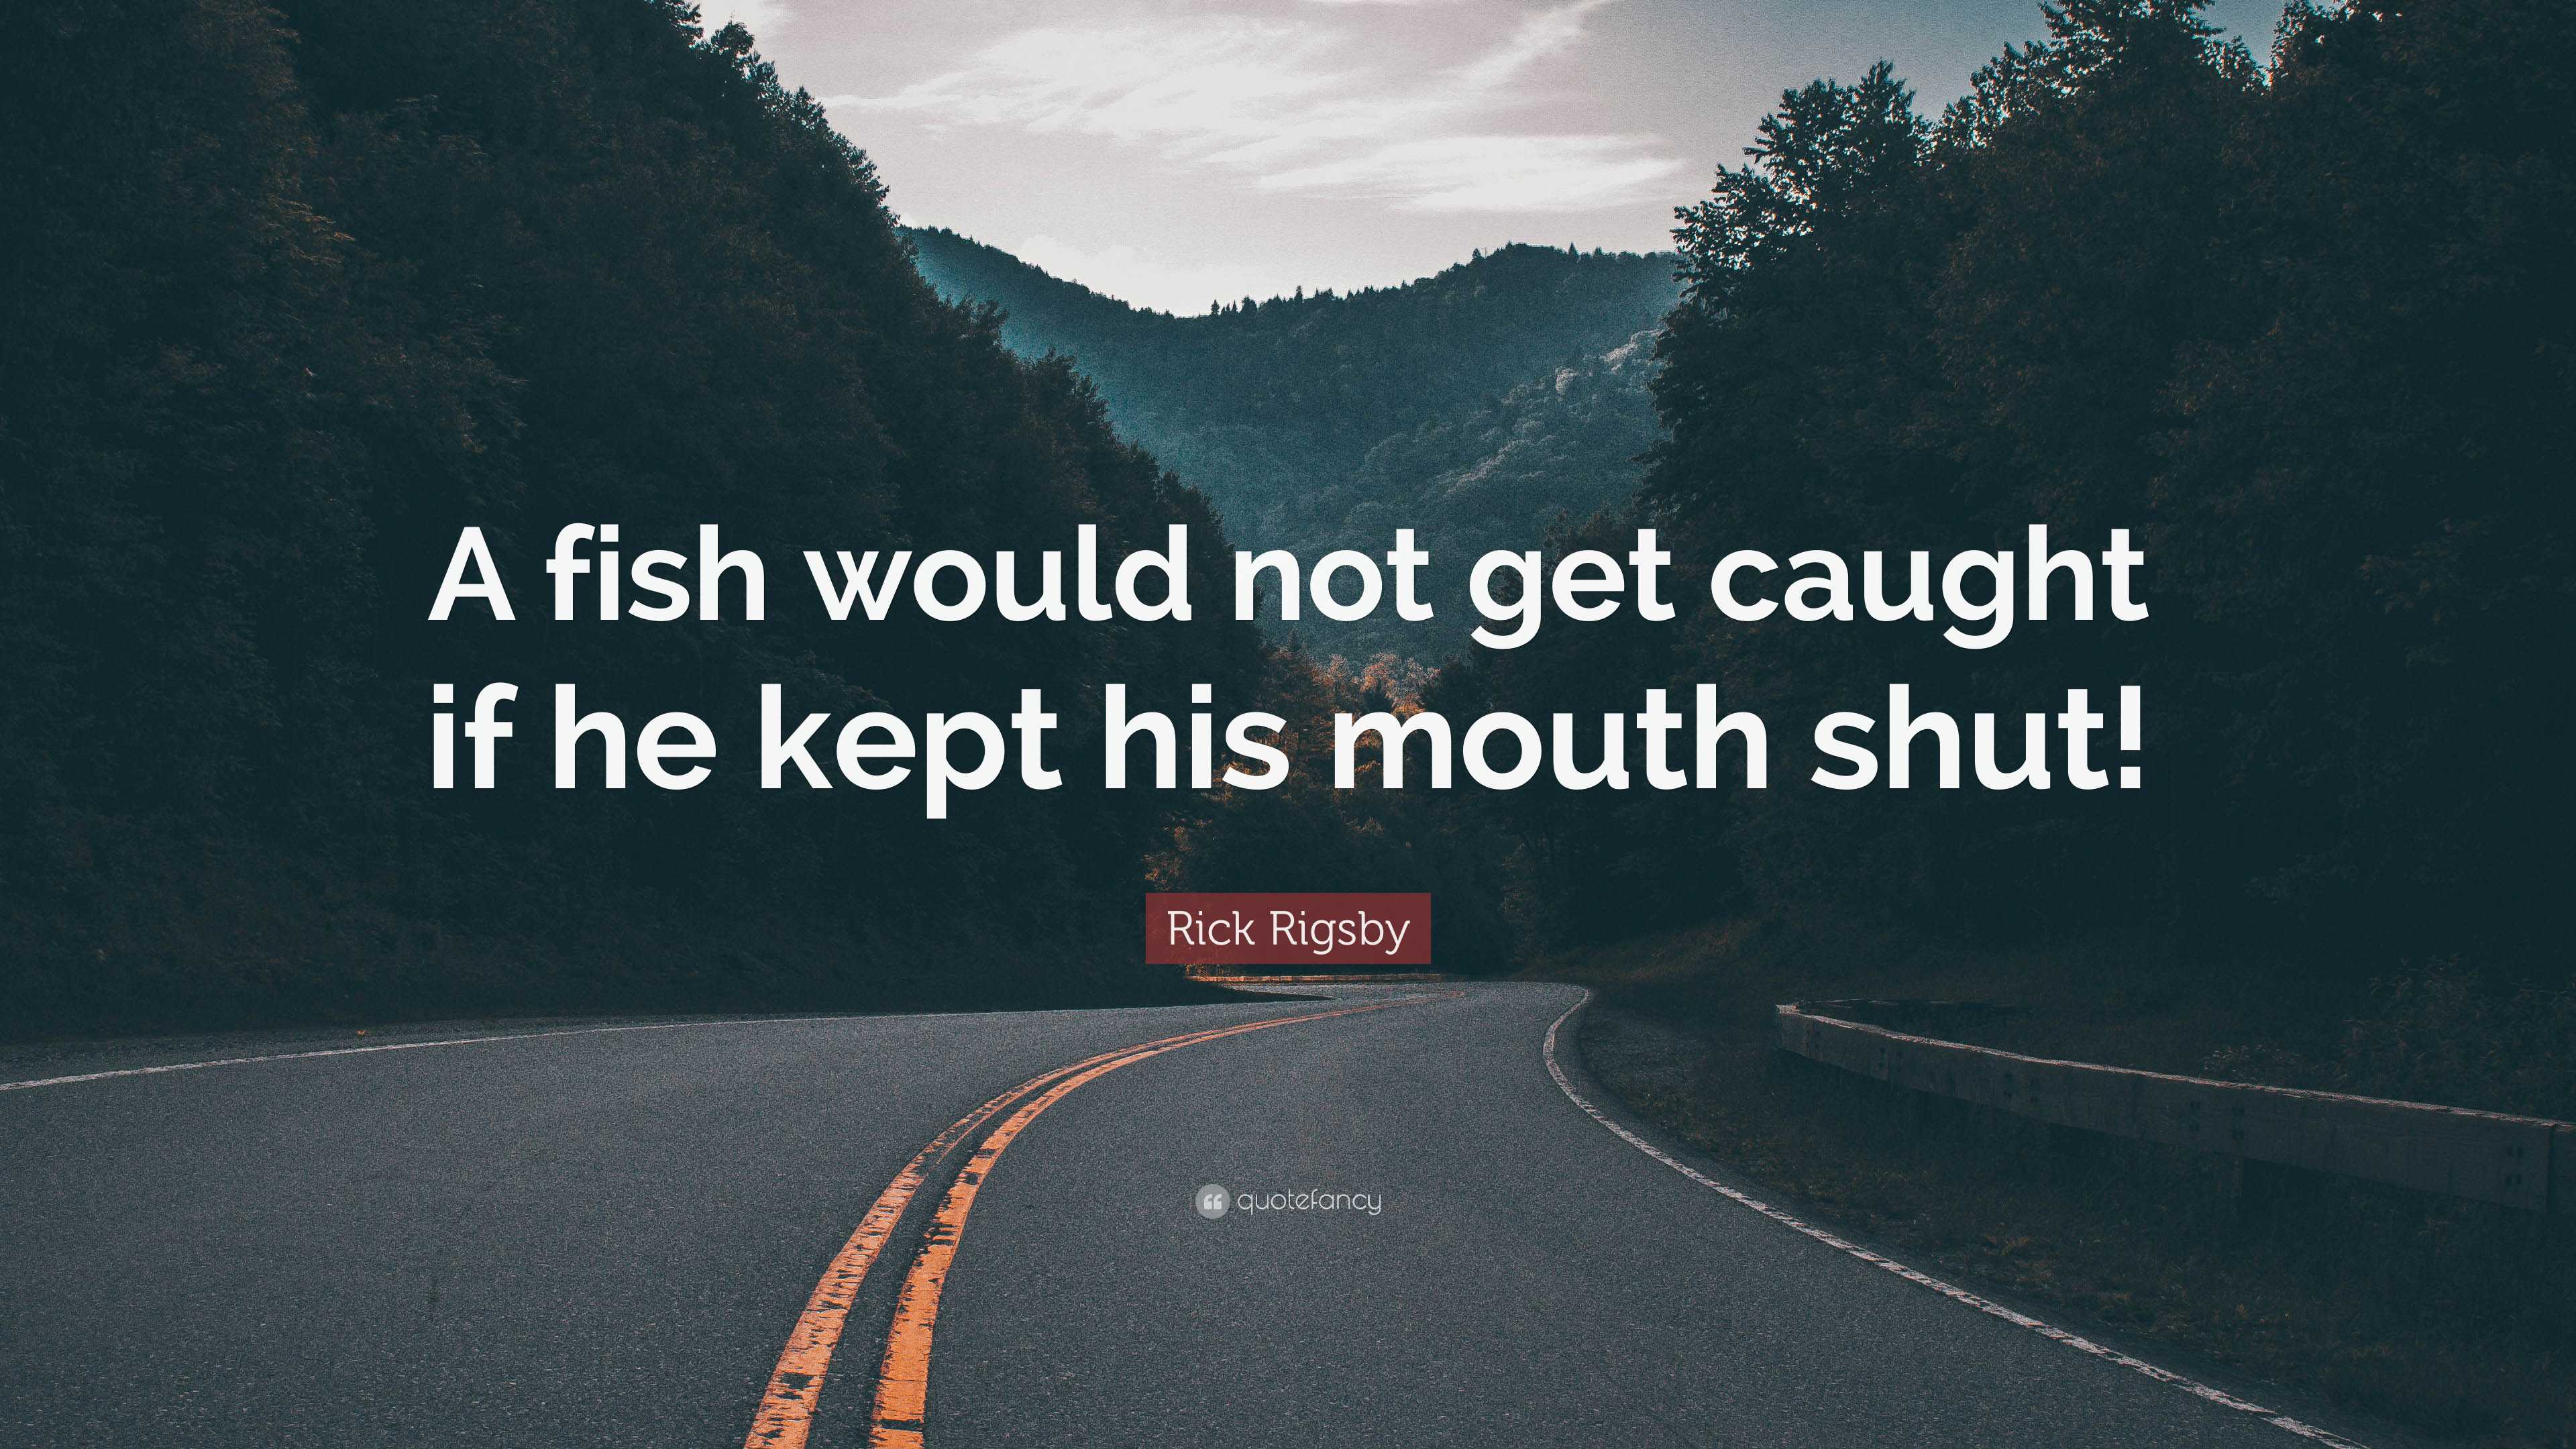 Rick Rigsby Quote: “A fish would not get caught if he kept his